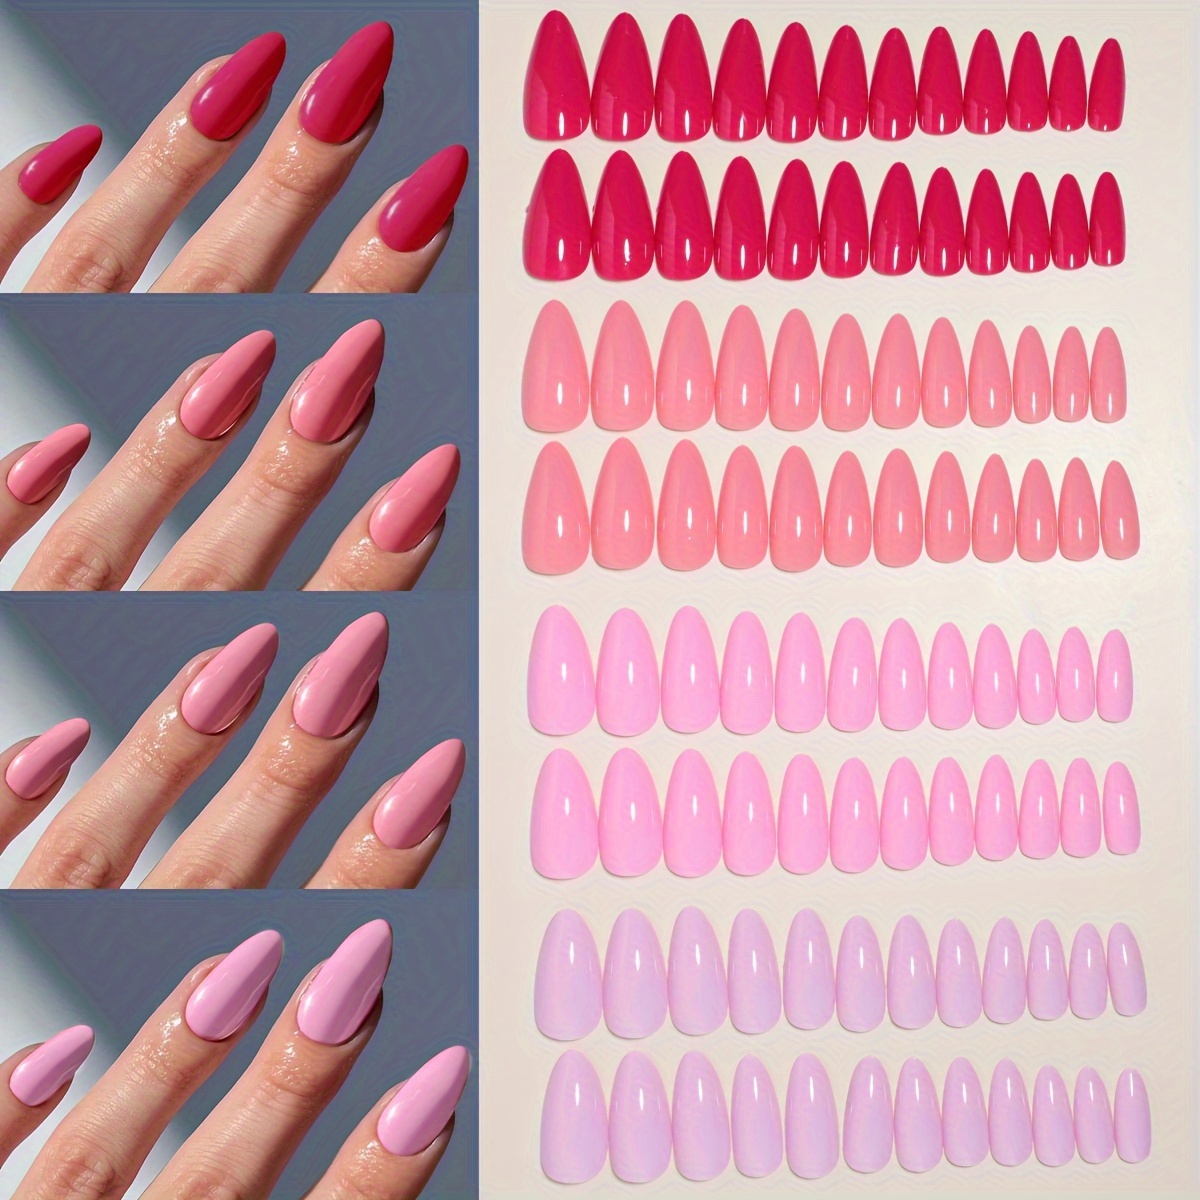 

4 Packs (96 Pcs) Almond Press On Nails - Glossy Finish, Long Lasting, Easy To Apply With Adhesive Tabs And Nail File - Perfect For Women's Fashion And Style